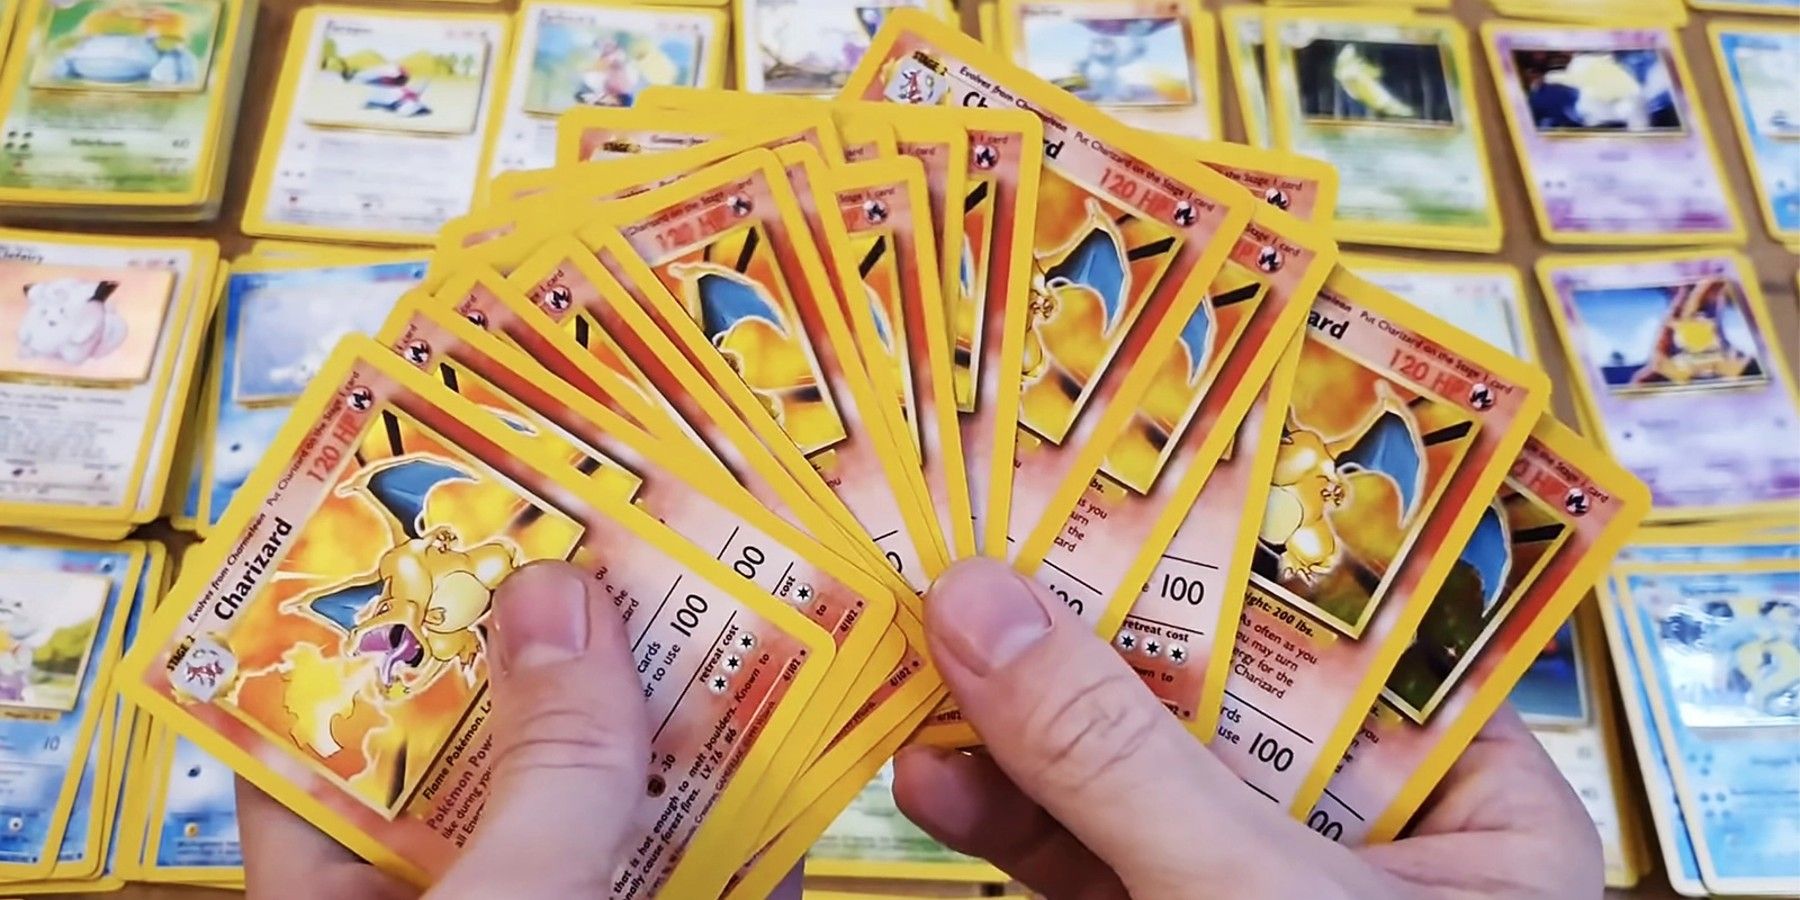 Pokemon Fan Finds Binder Full of Classic Cards When Cleaning Out Garage